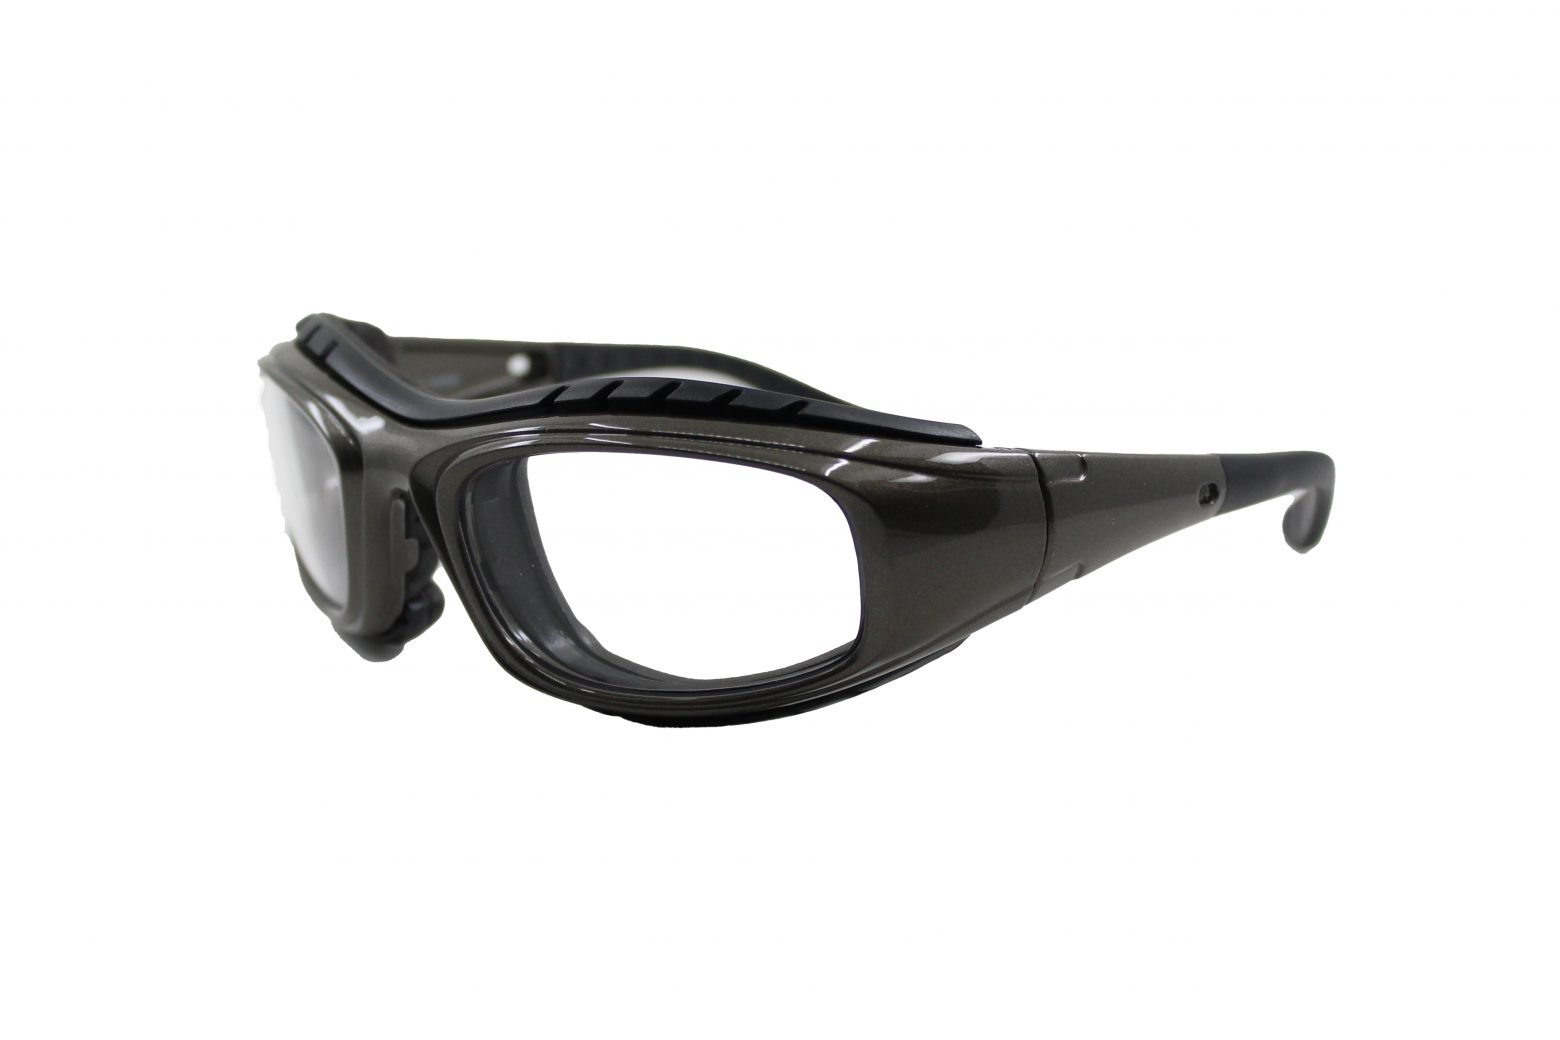 Matrix Venice Prescription Sports Glasses and Sunglasses - Best for Running, Cycling and Hunting